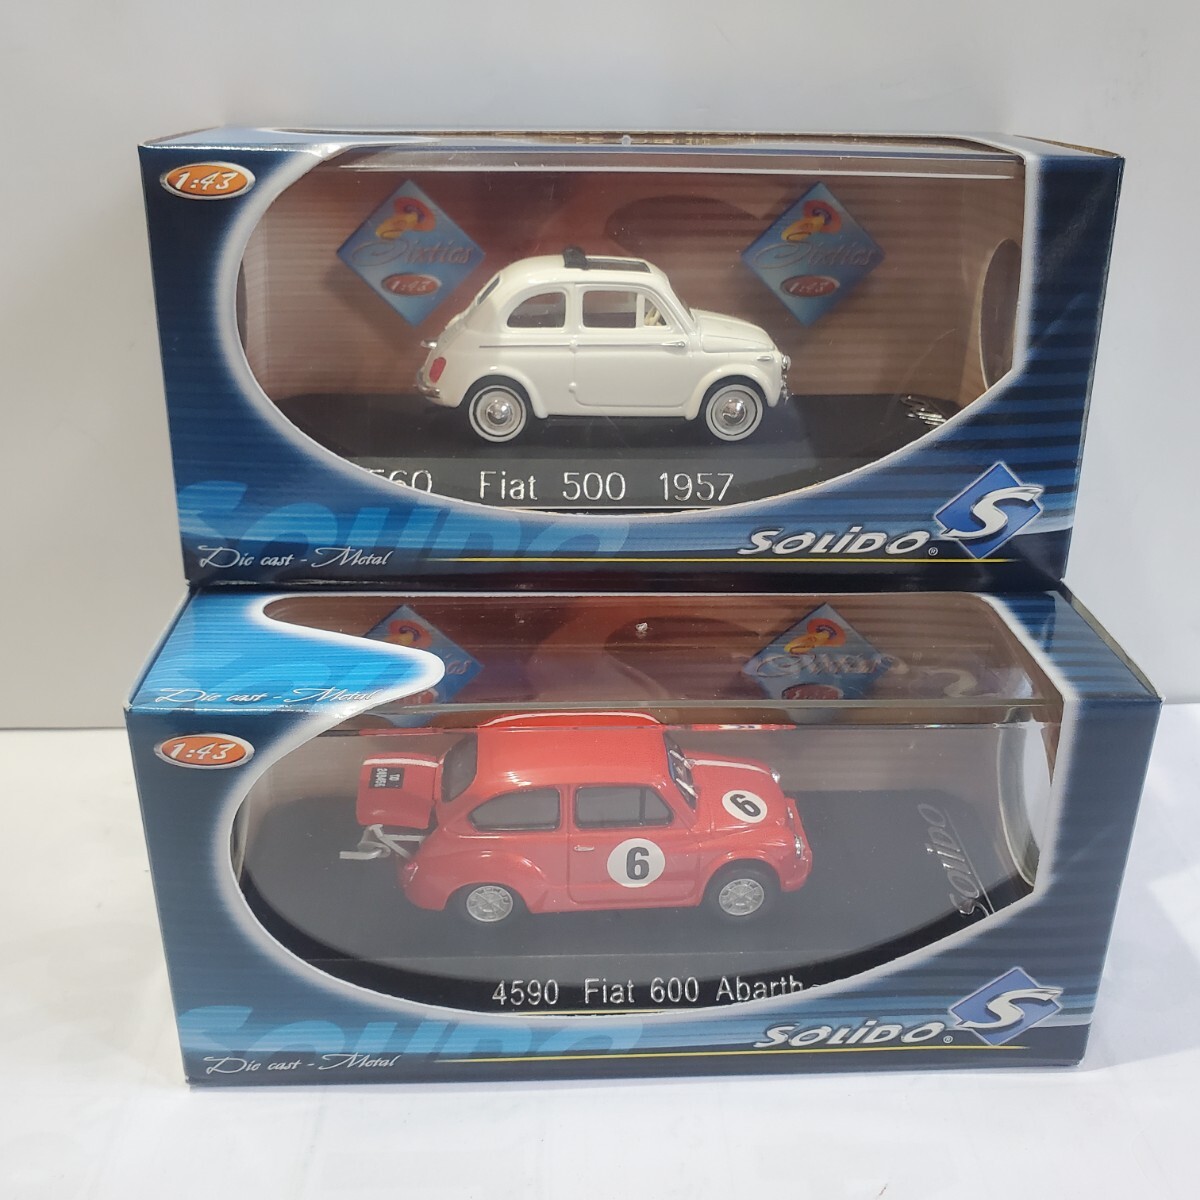 Solido Solido 1/43[FIAT 500 1957 white ].[FIAT 600 ABARTH red ]2 pcs. set new goods unused France made 301